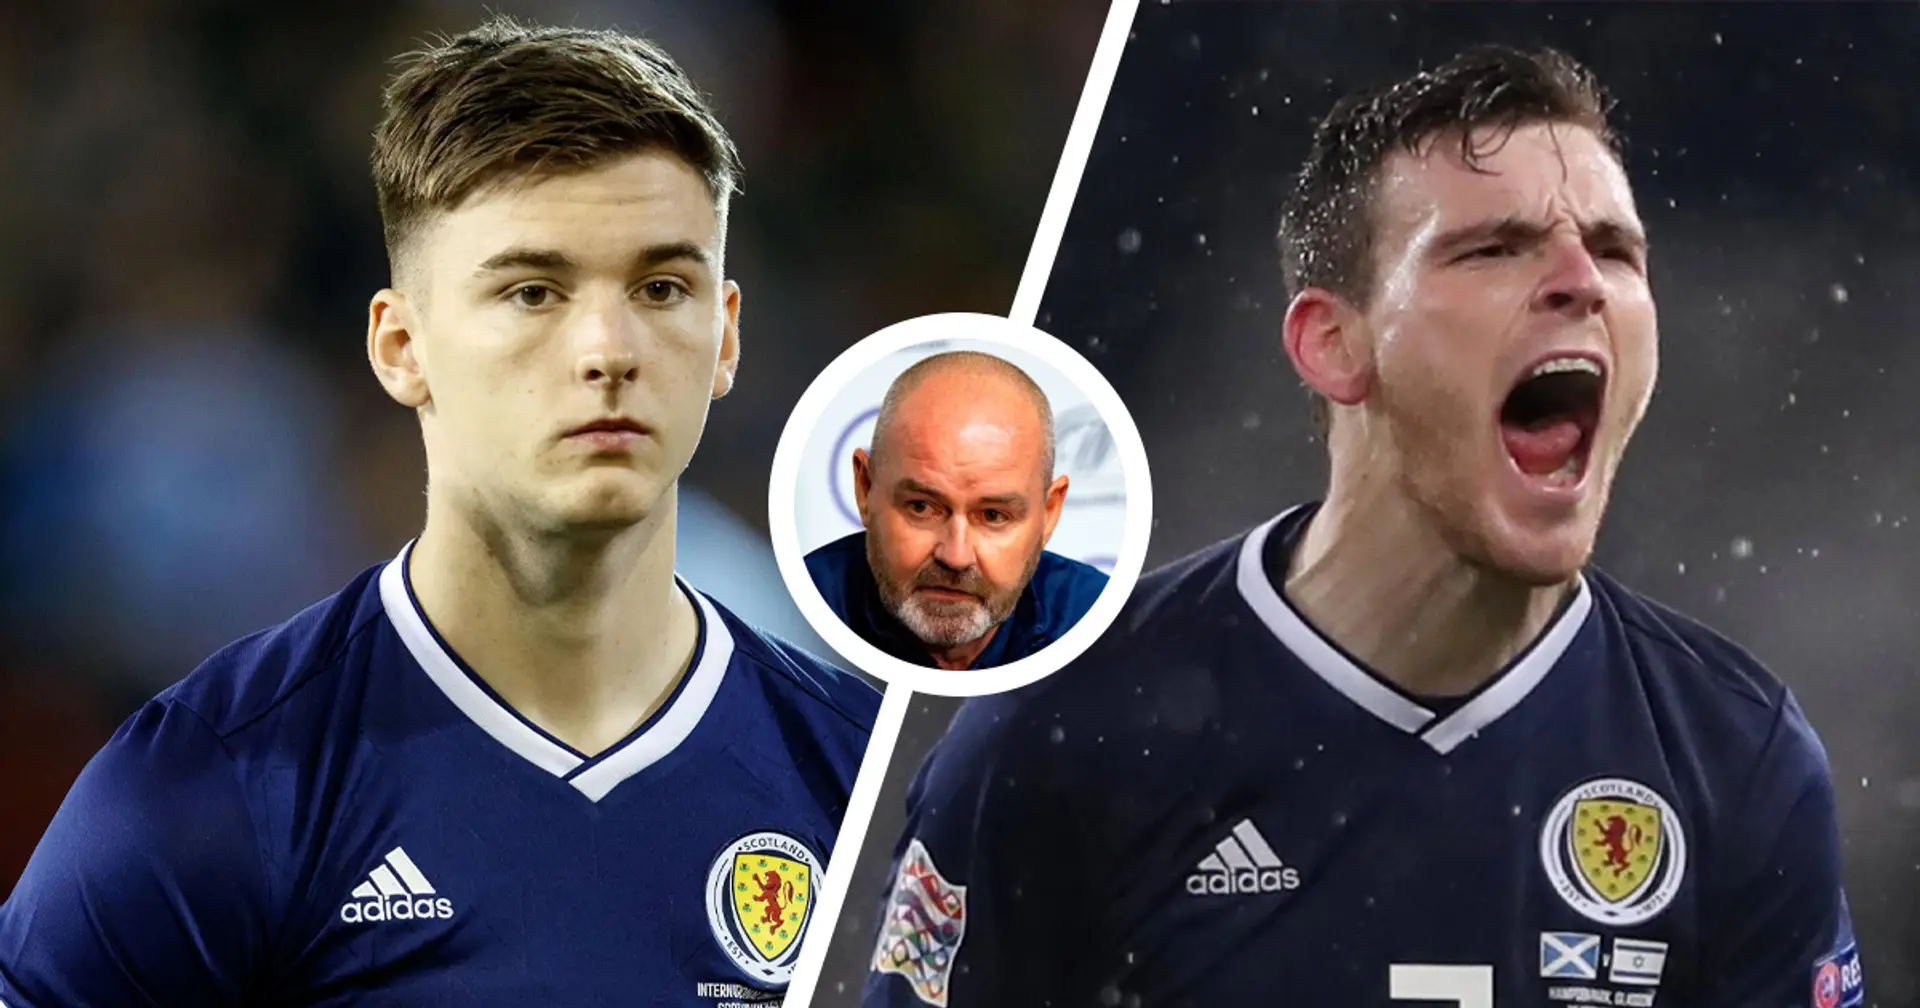 Scotland boss Steve Clarke: Tierney's versatility allows me to play him together with Robertson